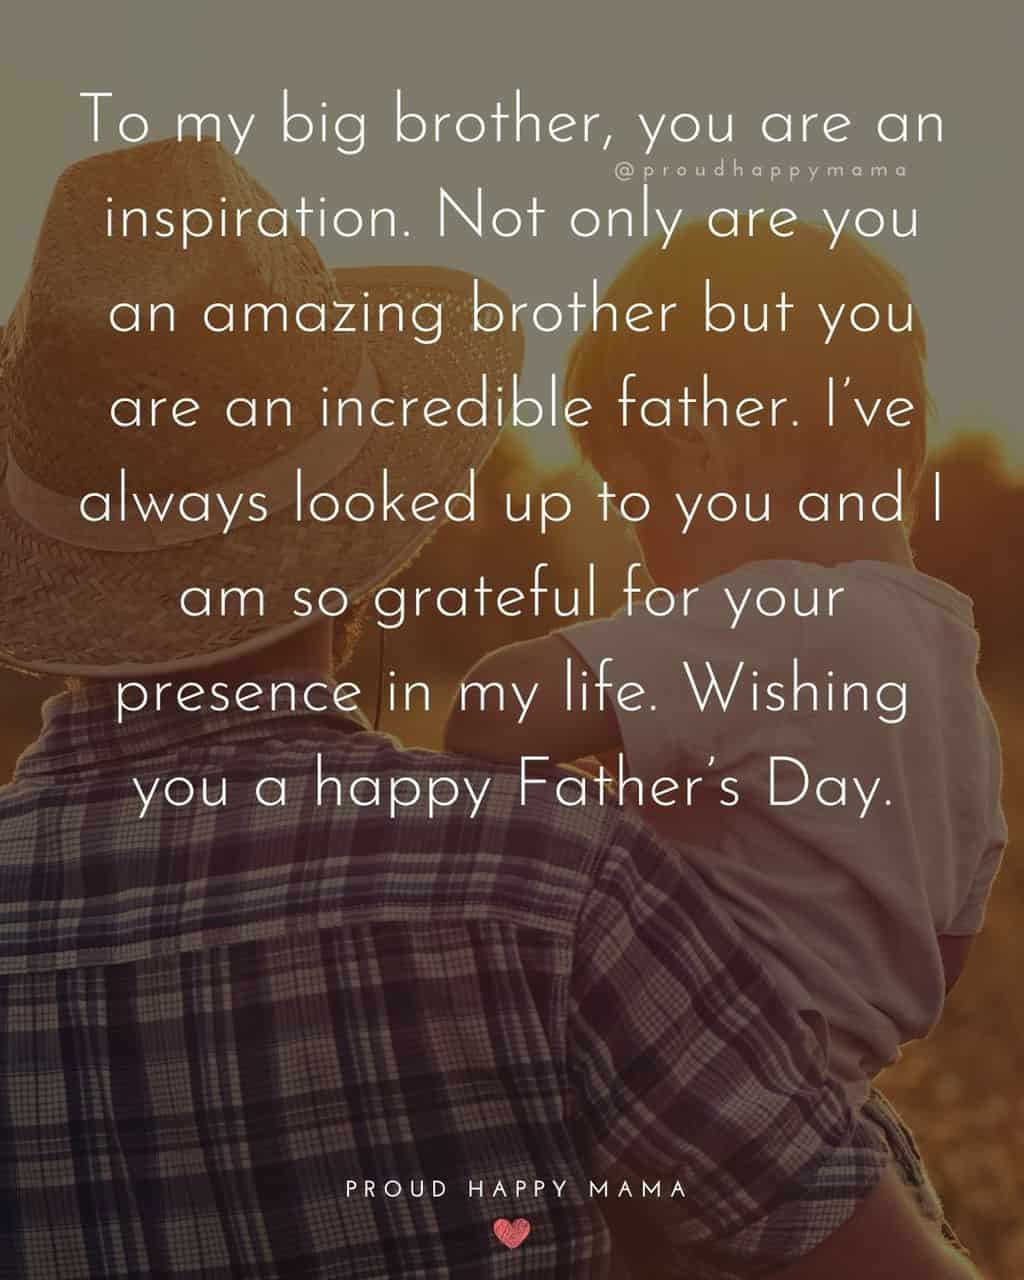 40 Happy Father’s Day Brother Quotes With Images